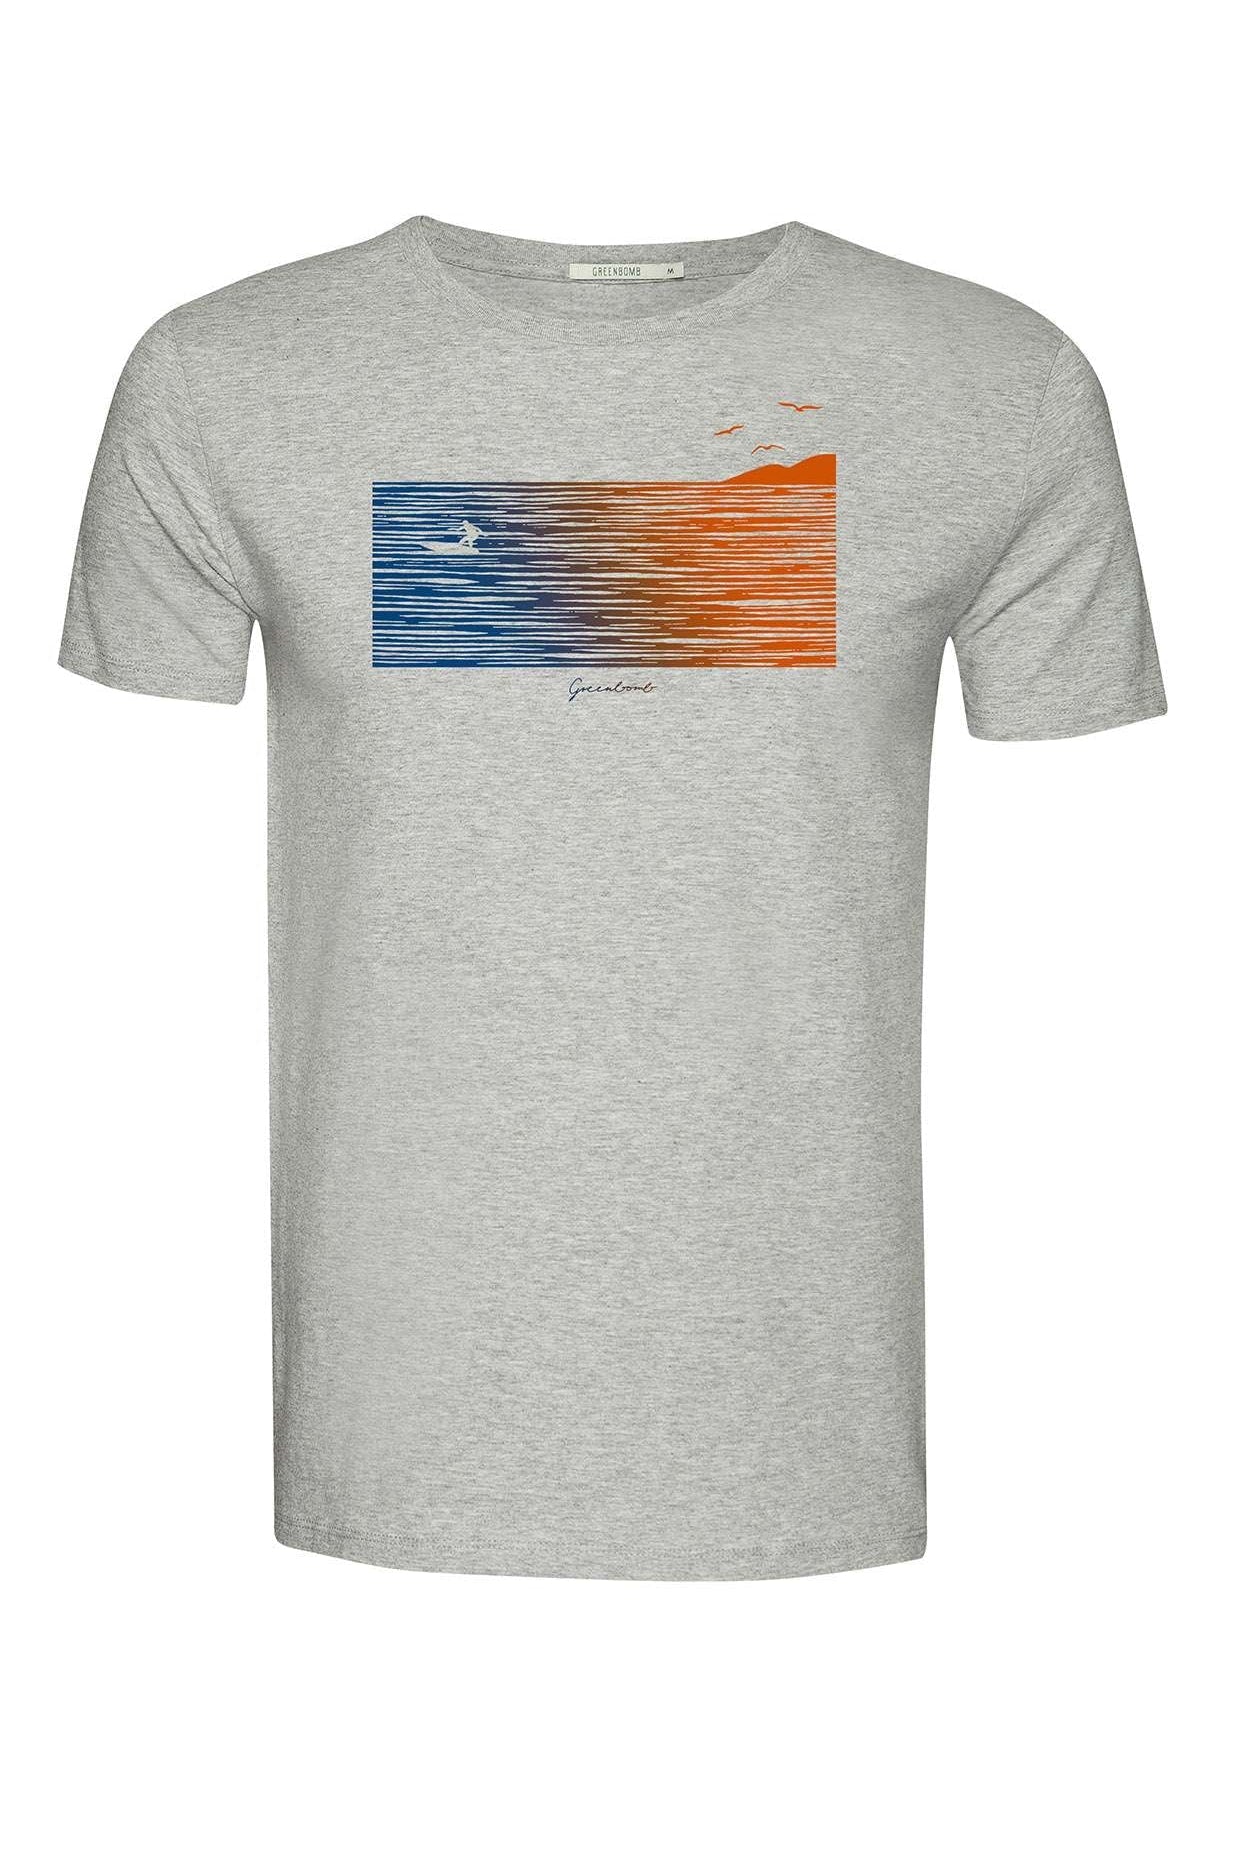 Greenbomb Nature Waves Solo Guide T-Shirt - Heather Grey-Mens-Ohh! By Gum - Shop Sustainable